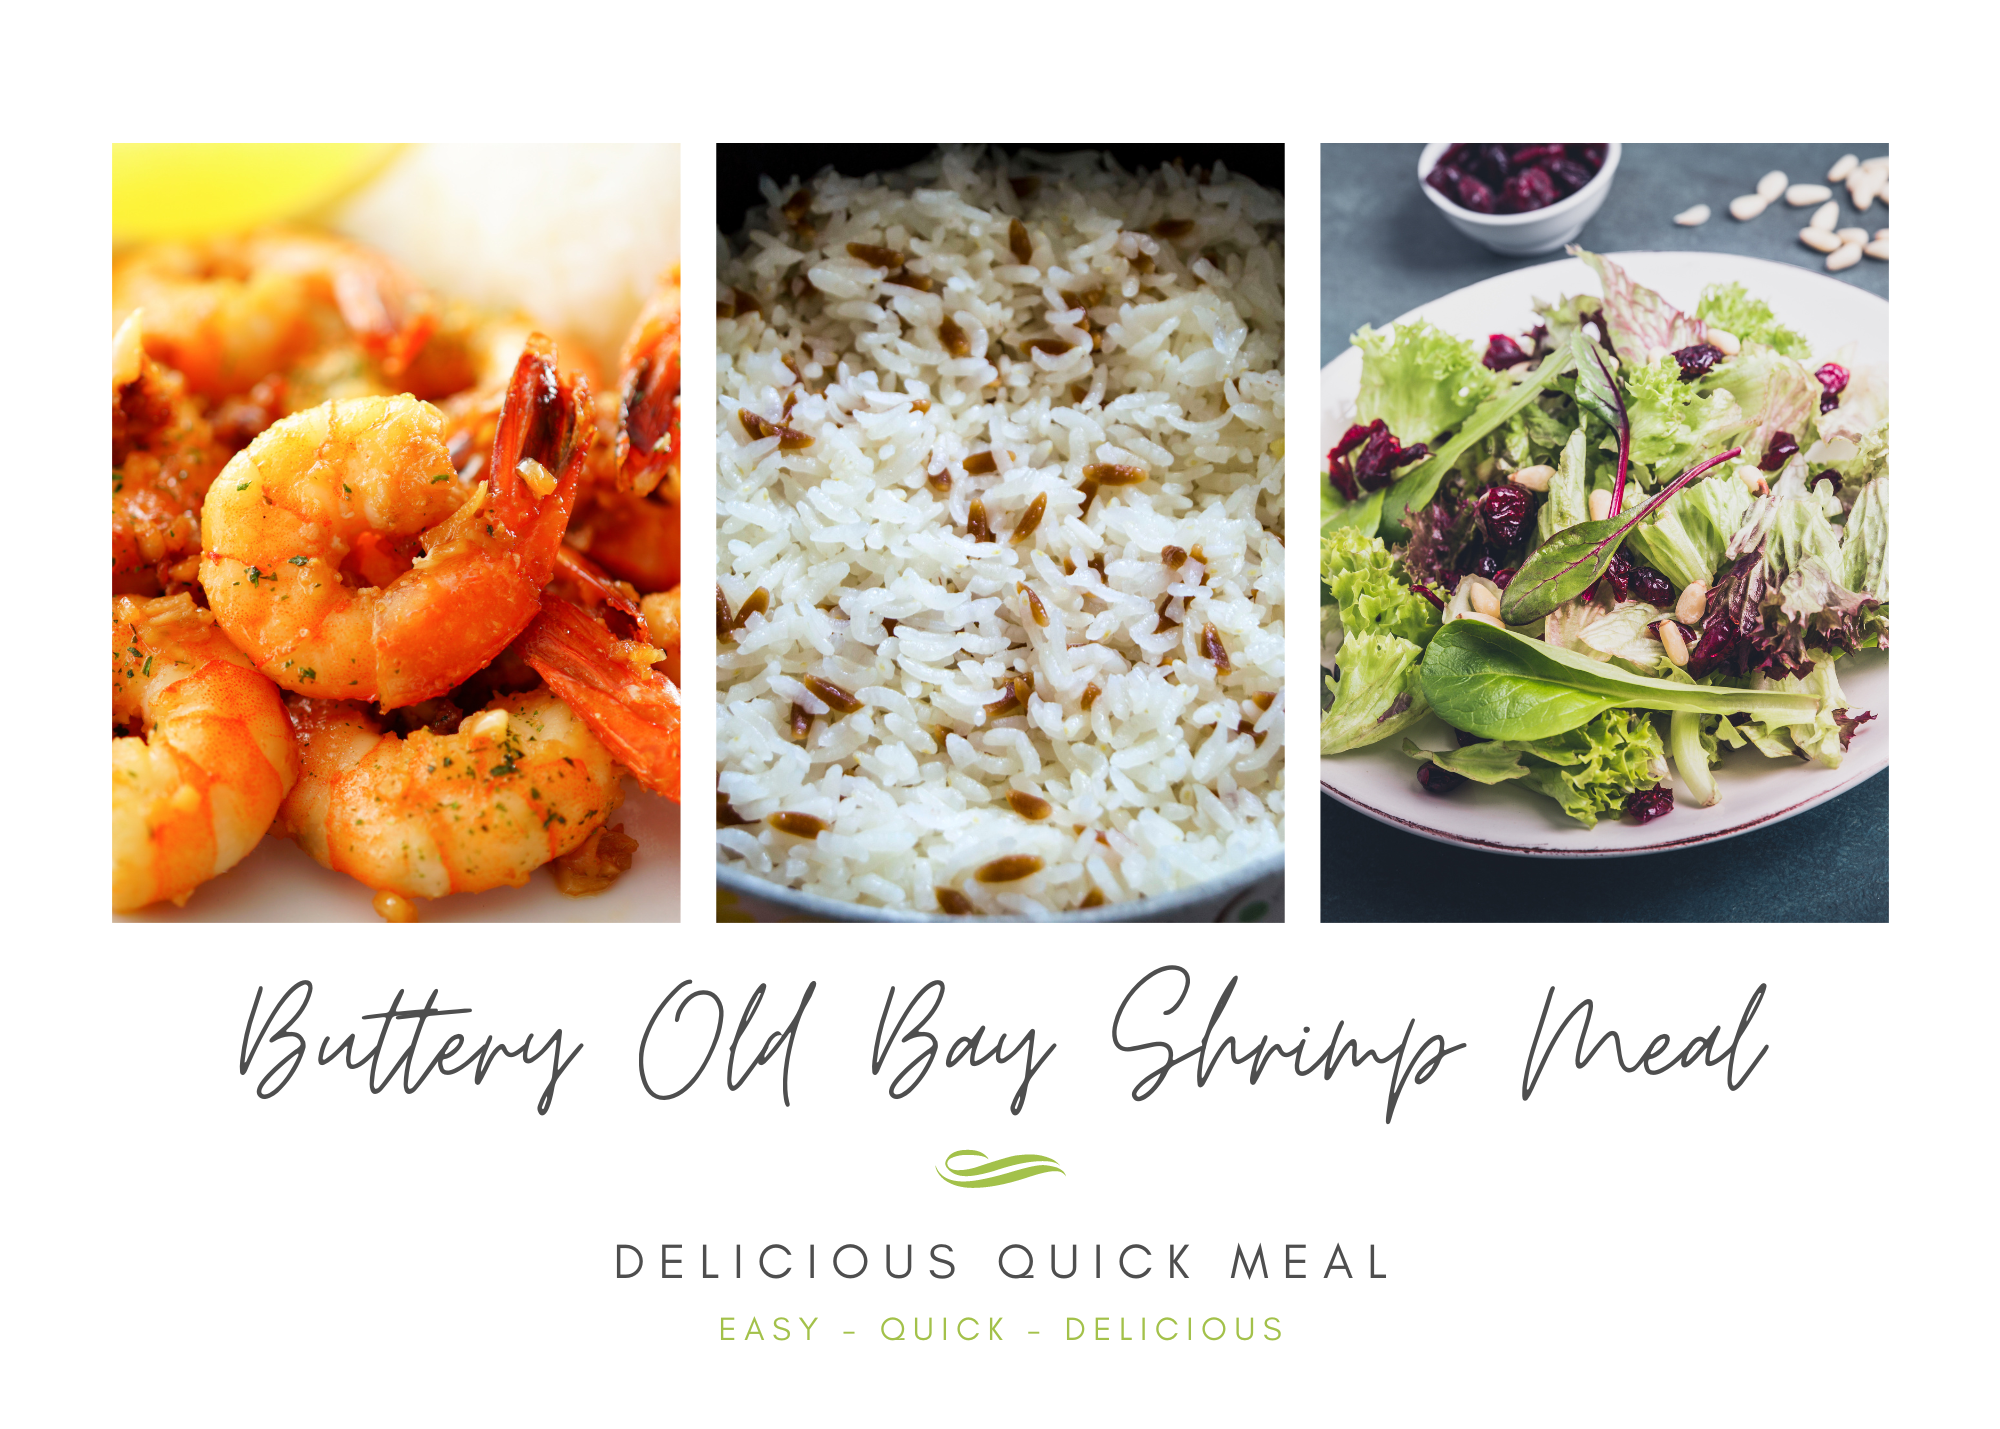 Dinner 18: Quick Buttery Old Bay Shrimp Meal